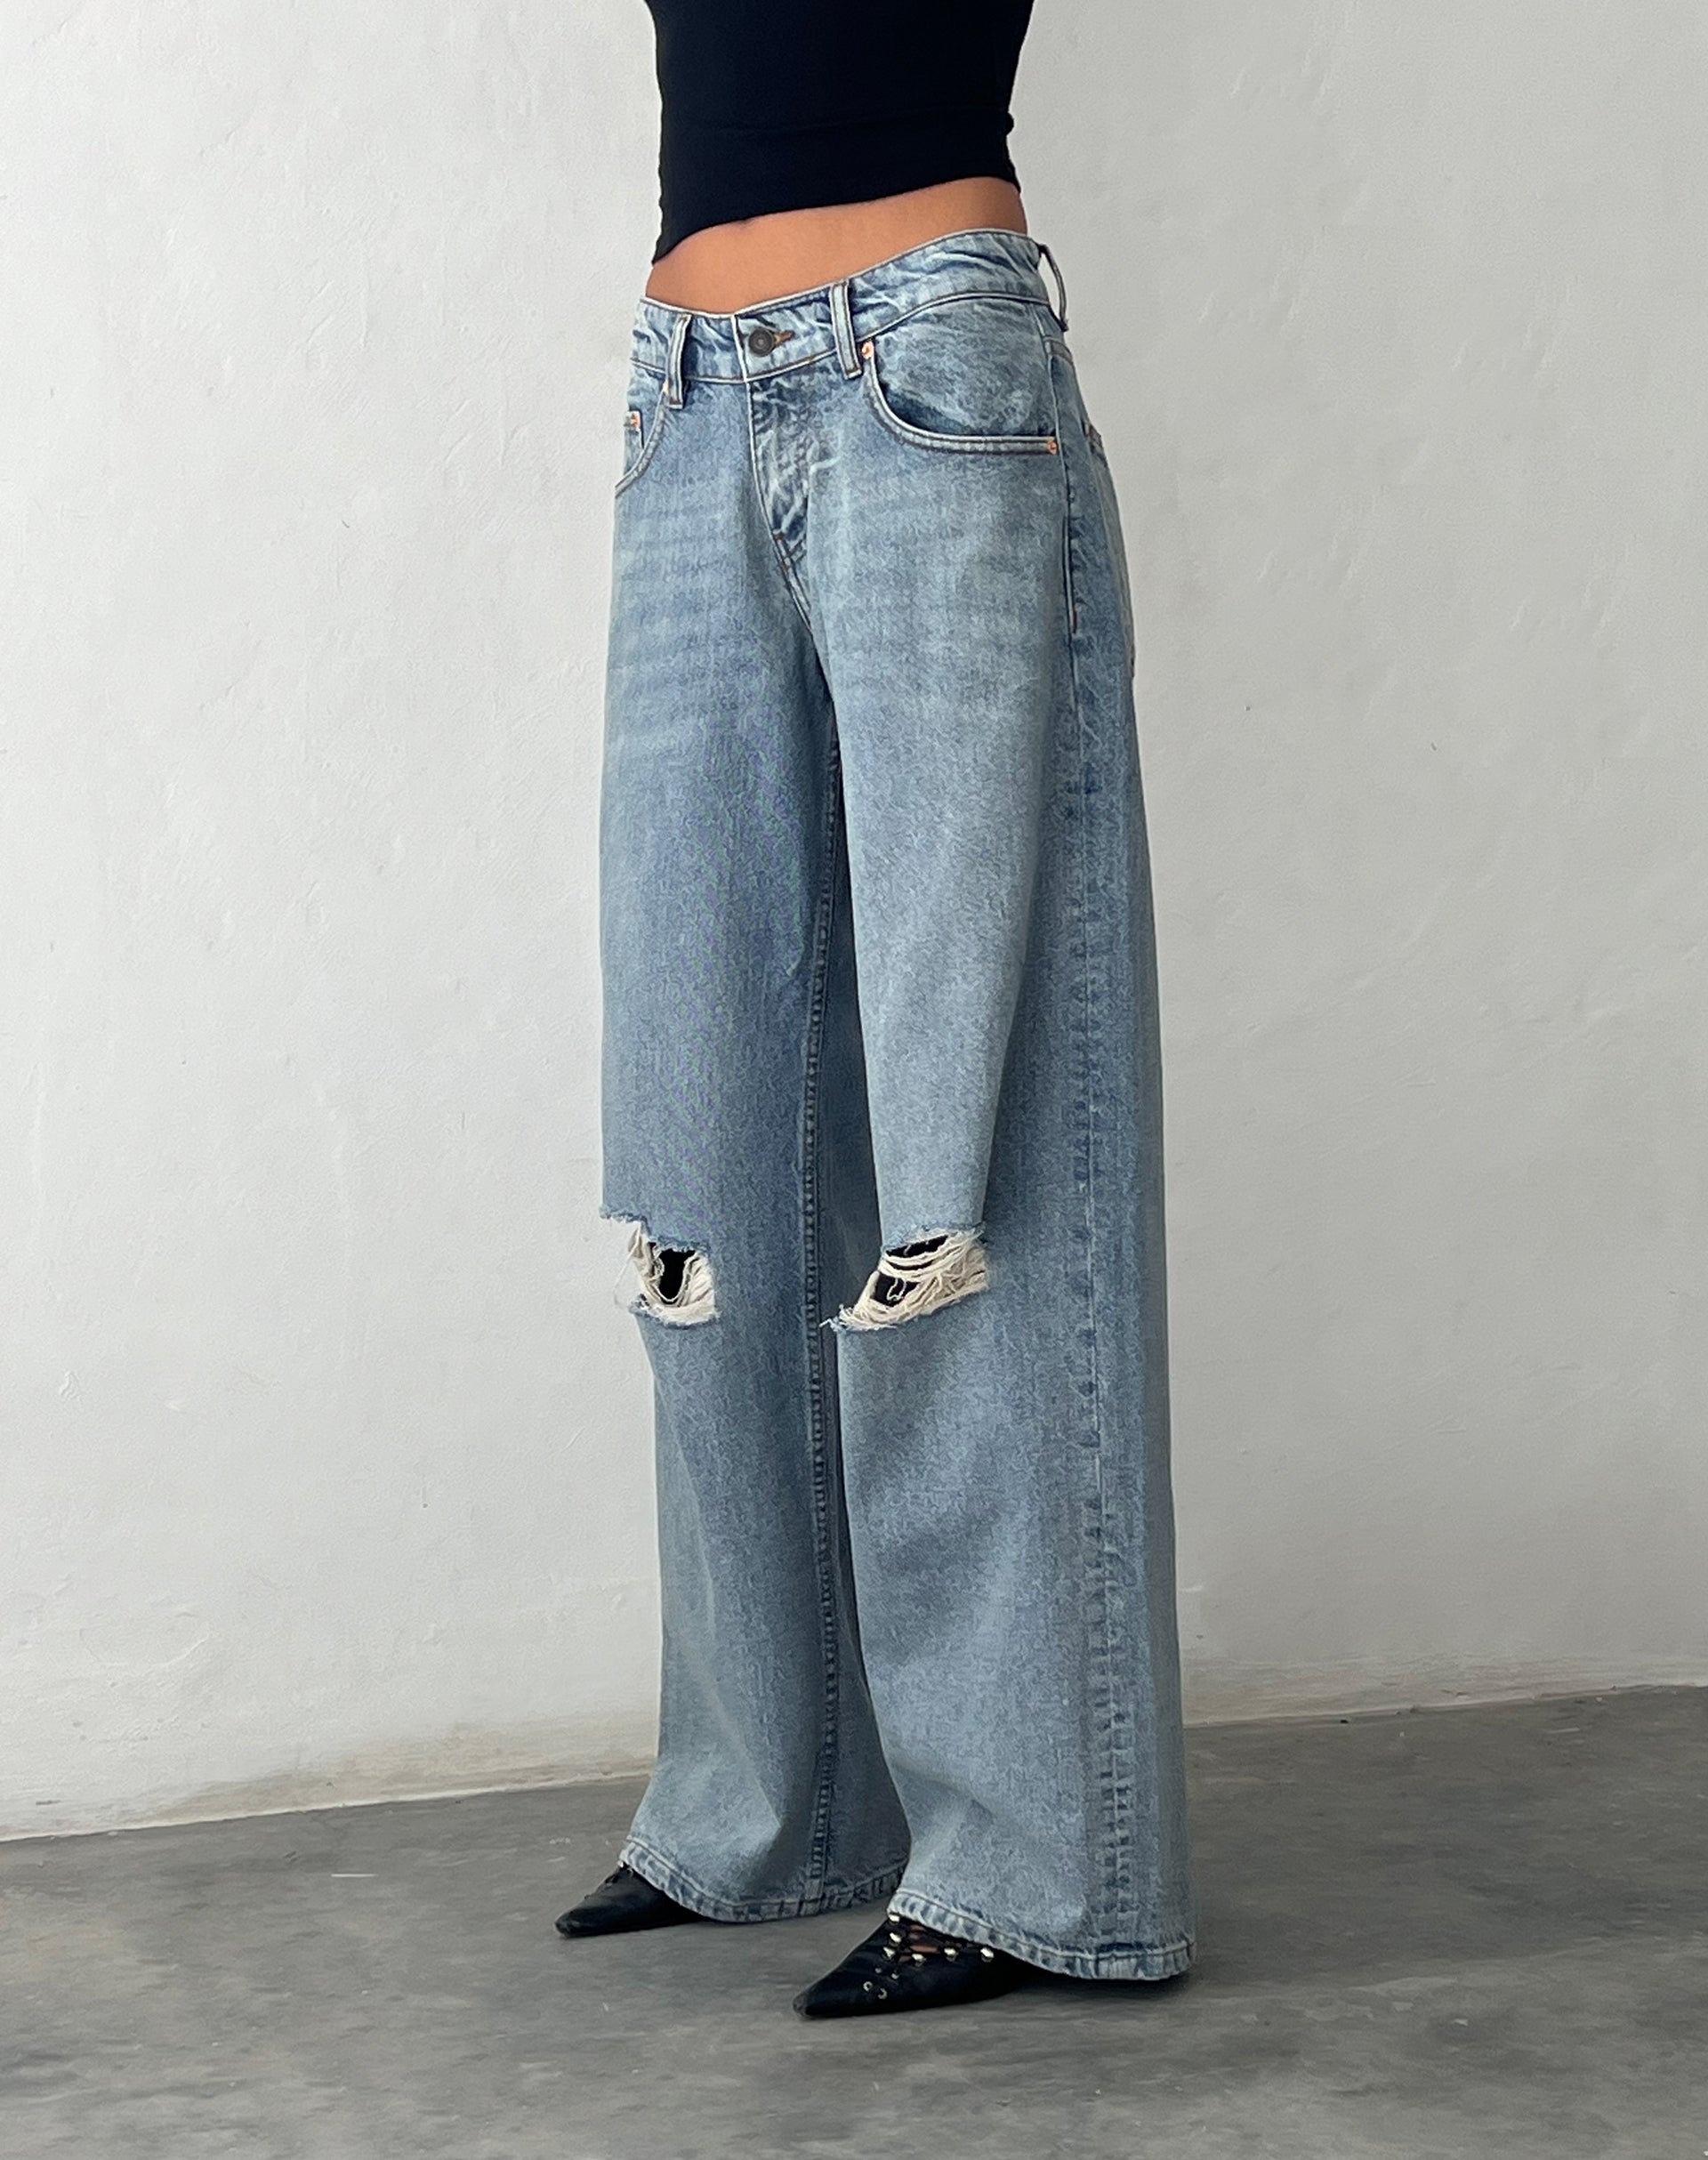 Bild von Ripped Roomy Extra Wide Low Rise Jean in Vintage Blue Wash